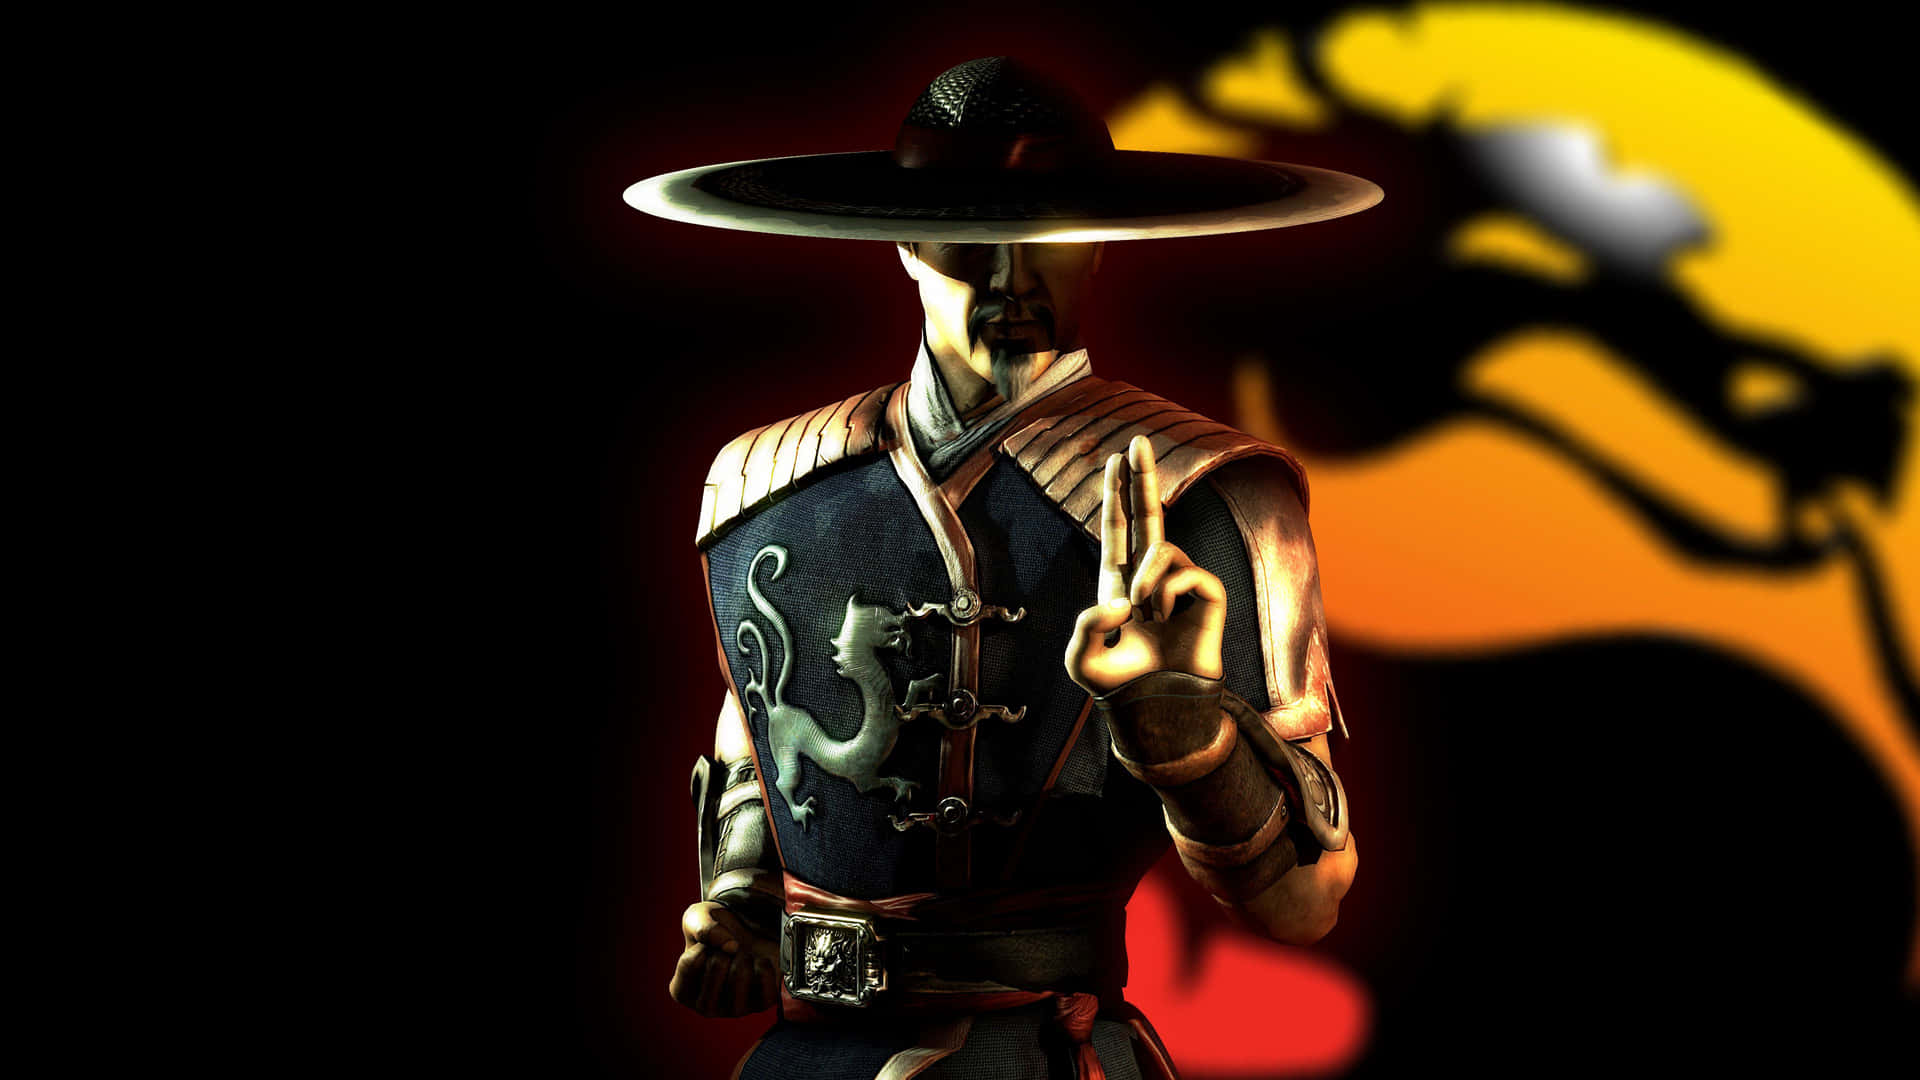 Kung Lao Stands Ready for Battle in Mortal Kombat Wallpaper